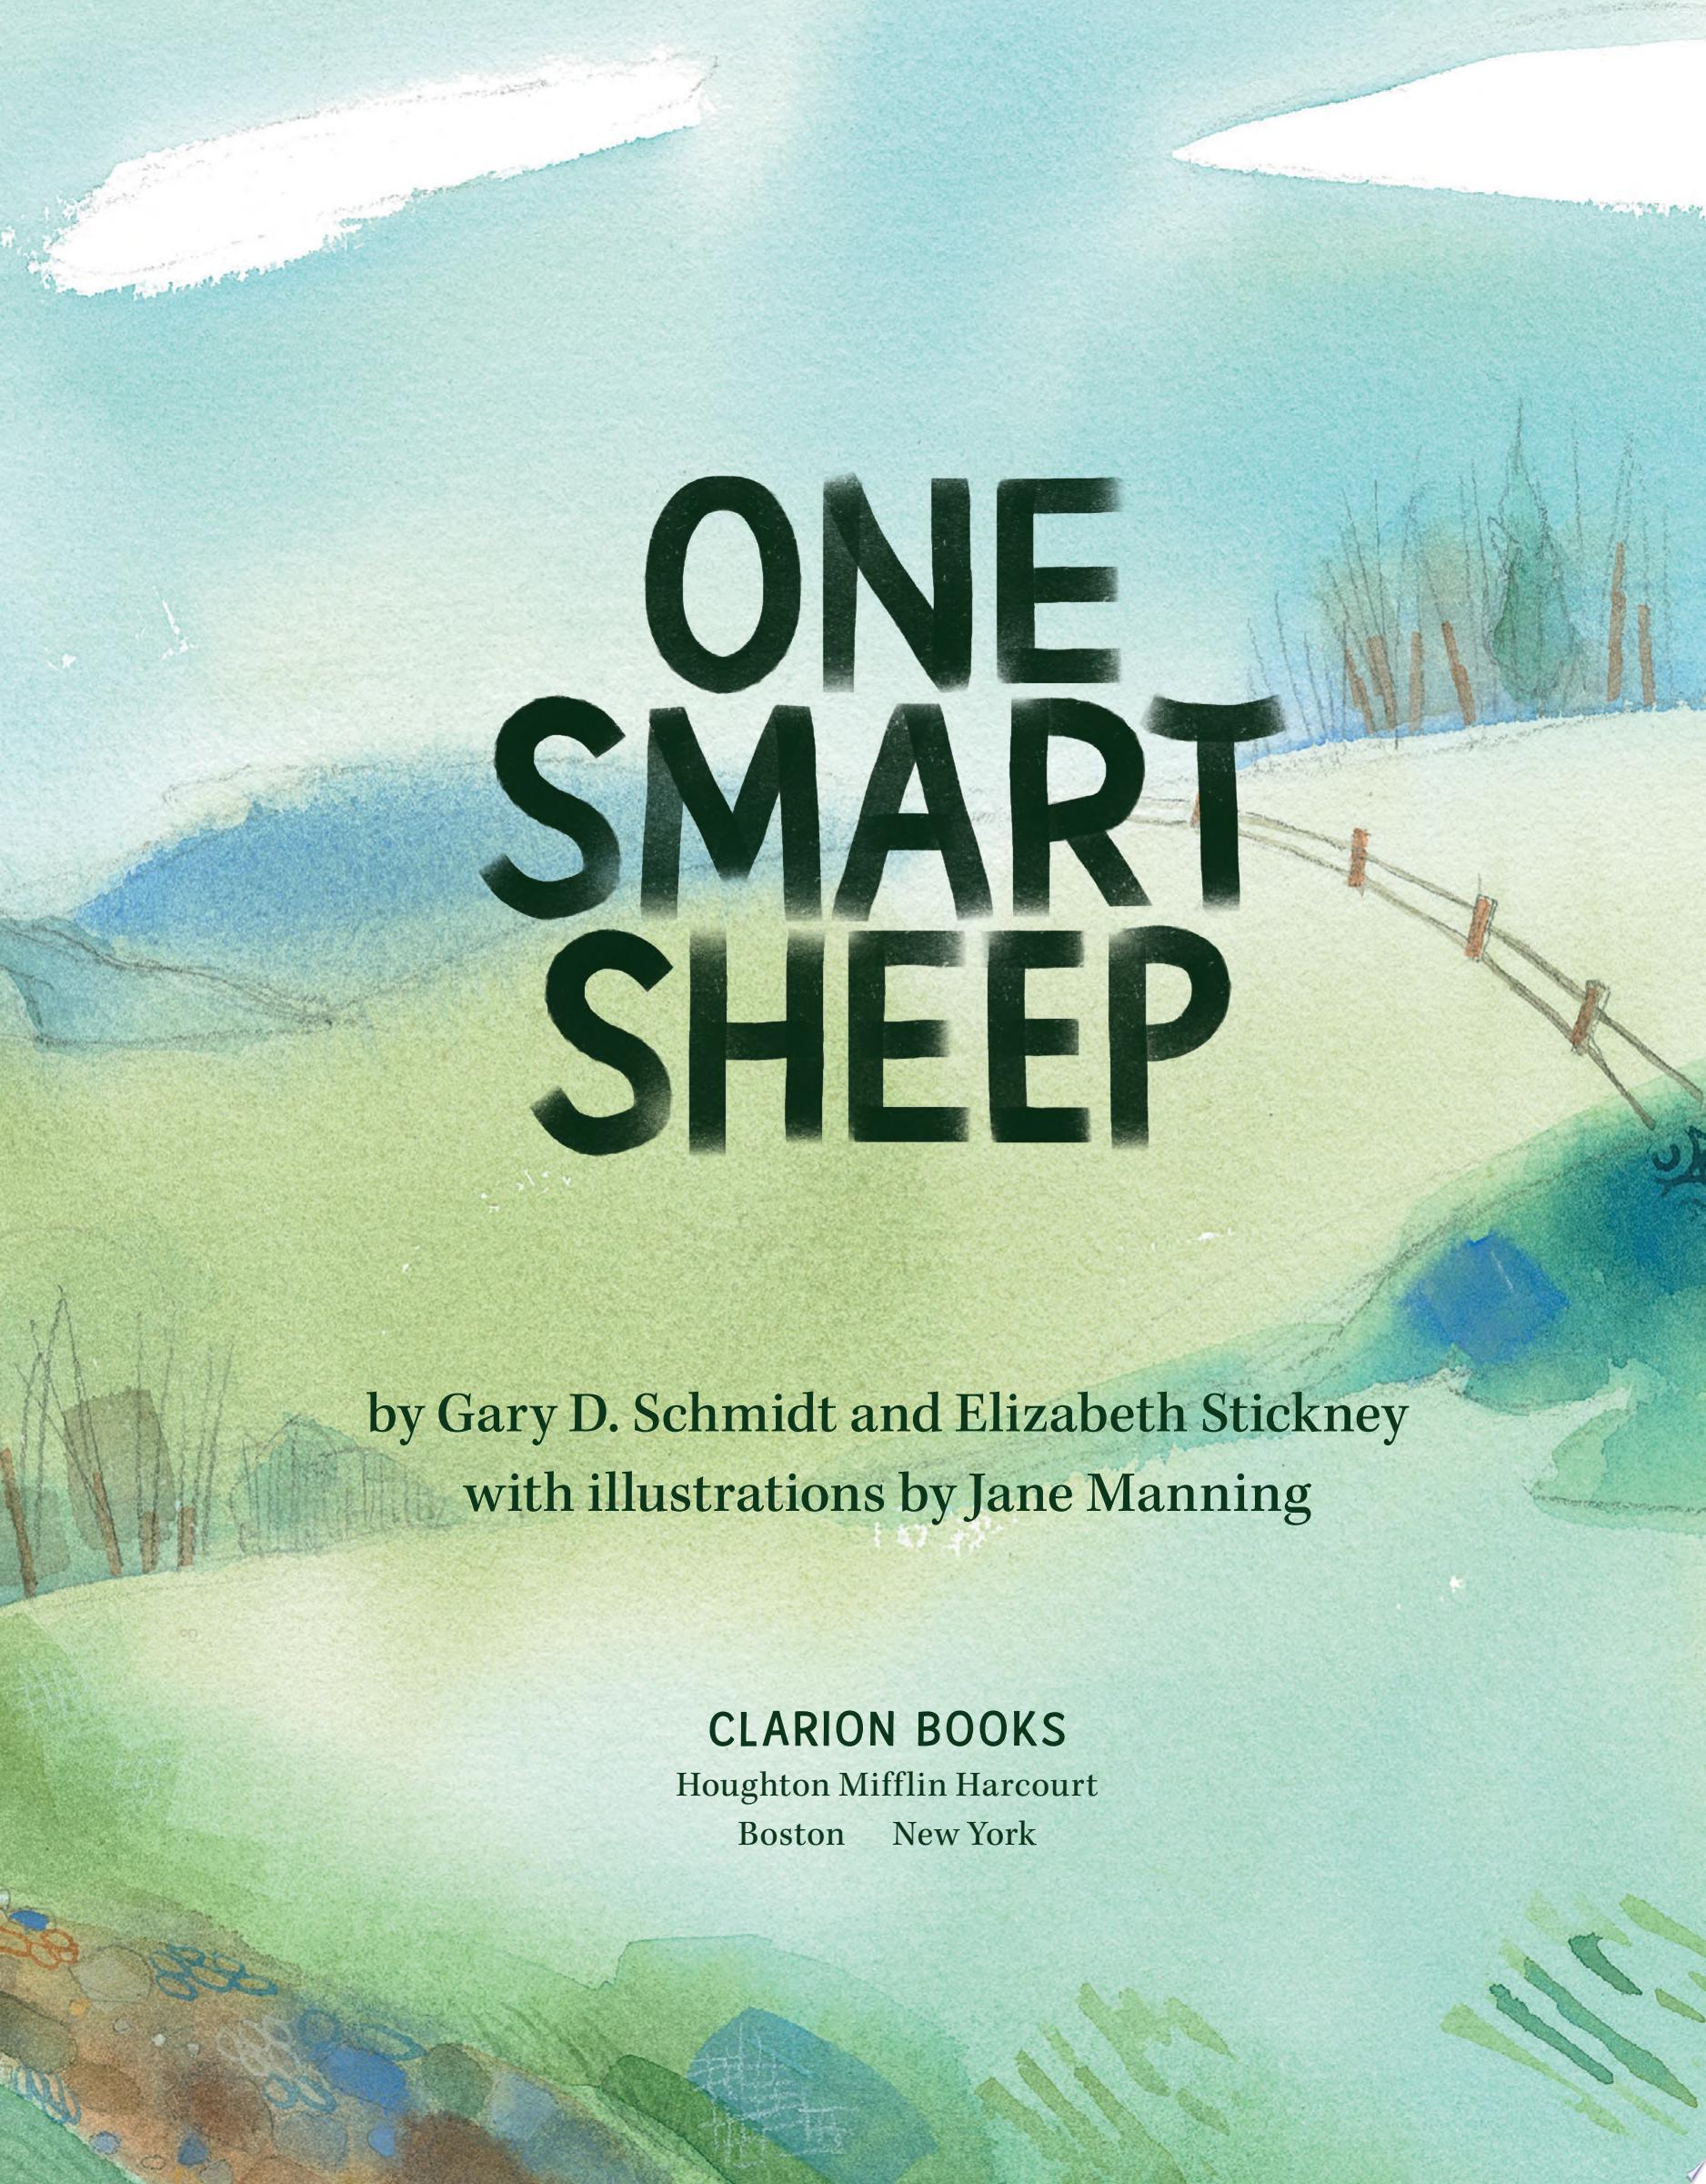 Image for "One Smart Sheep"